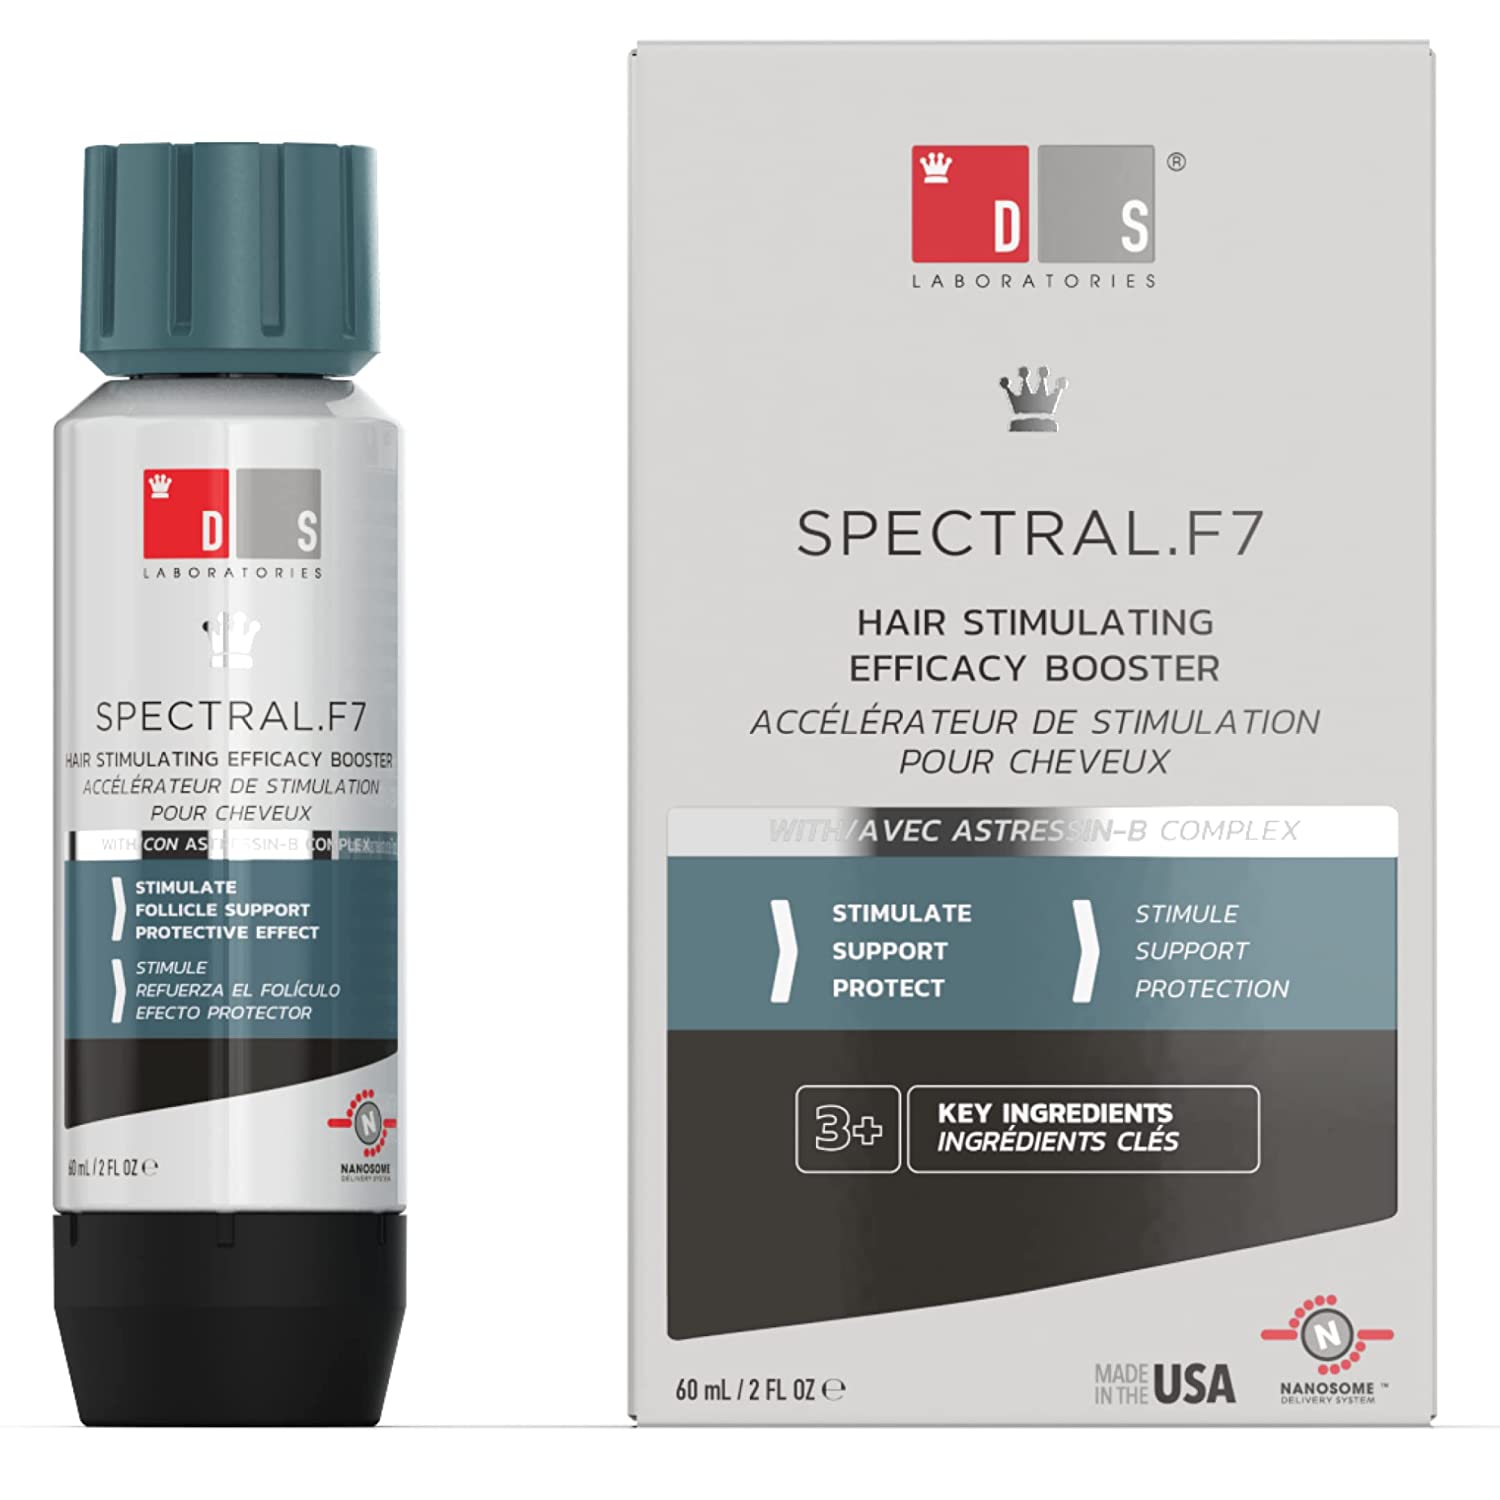 SPECTRAL.F7 | Hair Stimulating Efficacy Booster Agent with Astressin B